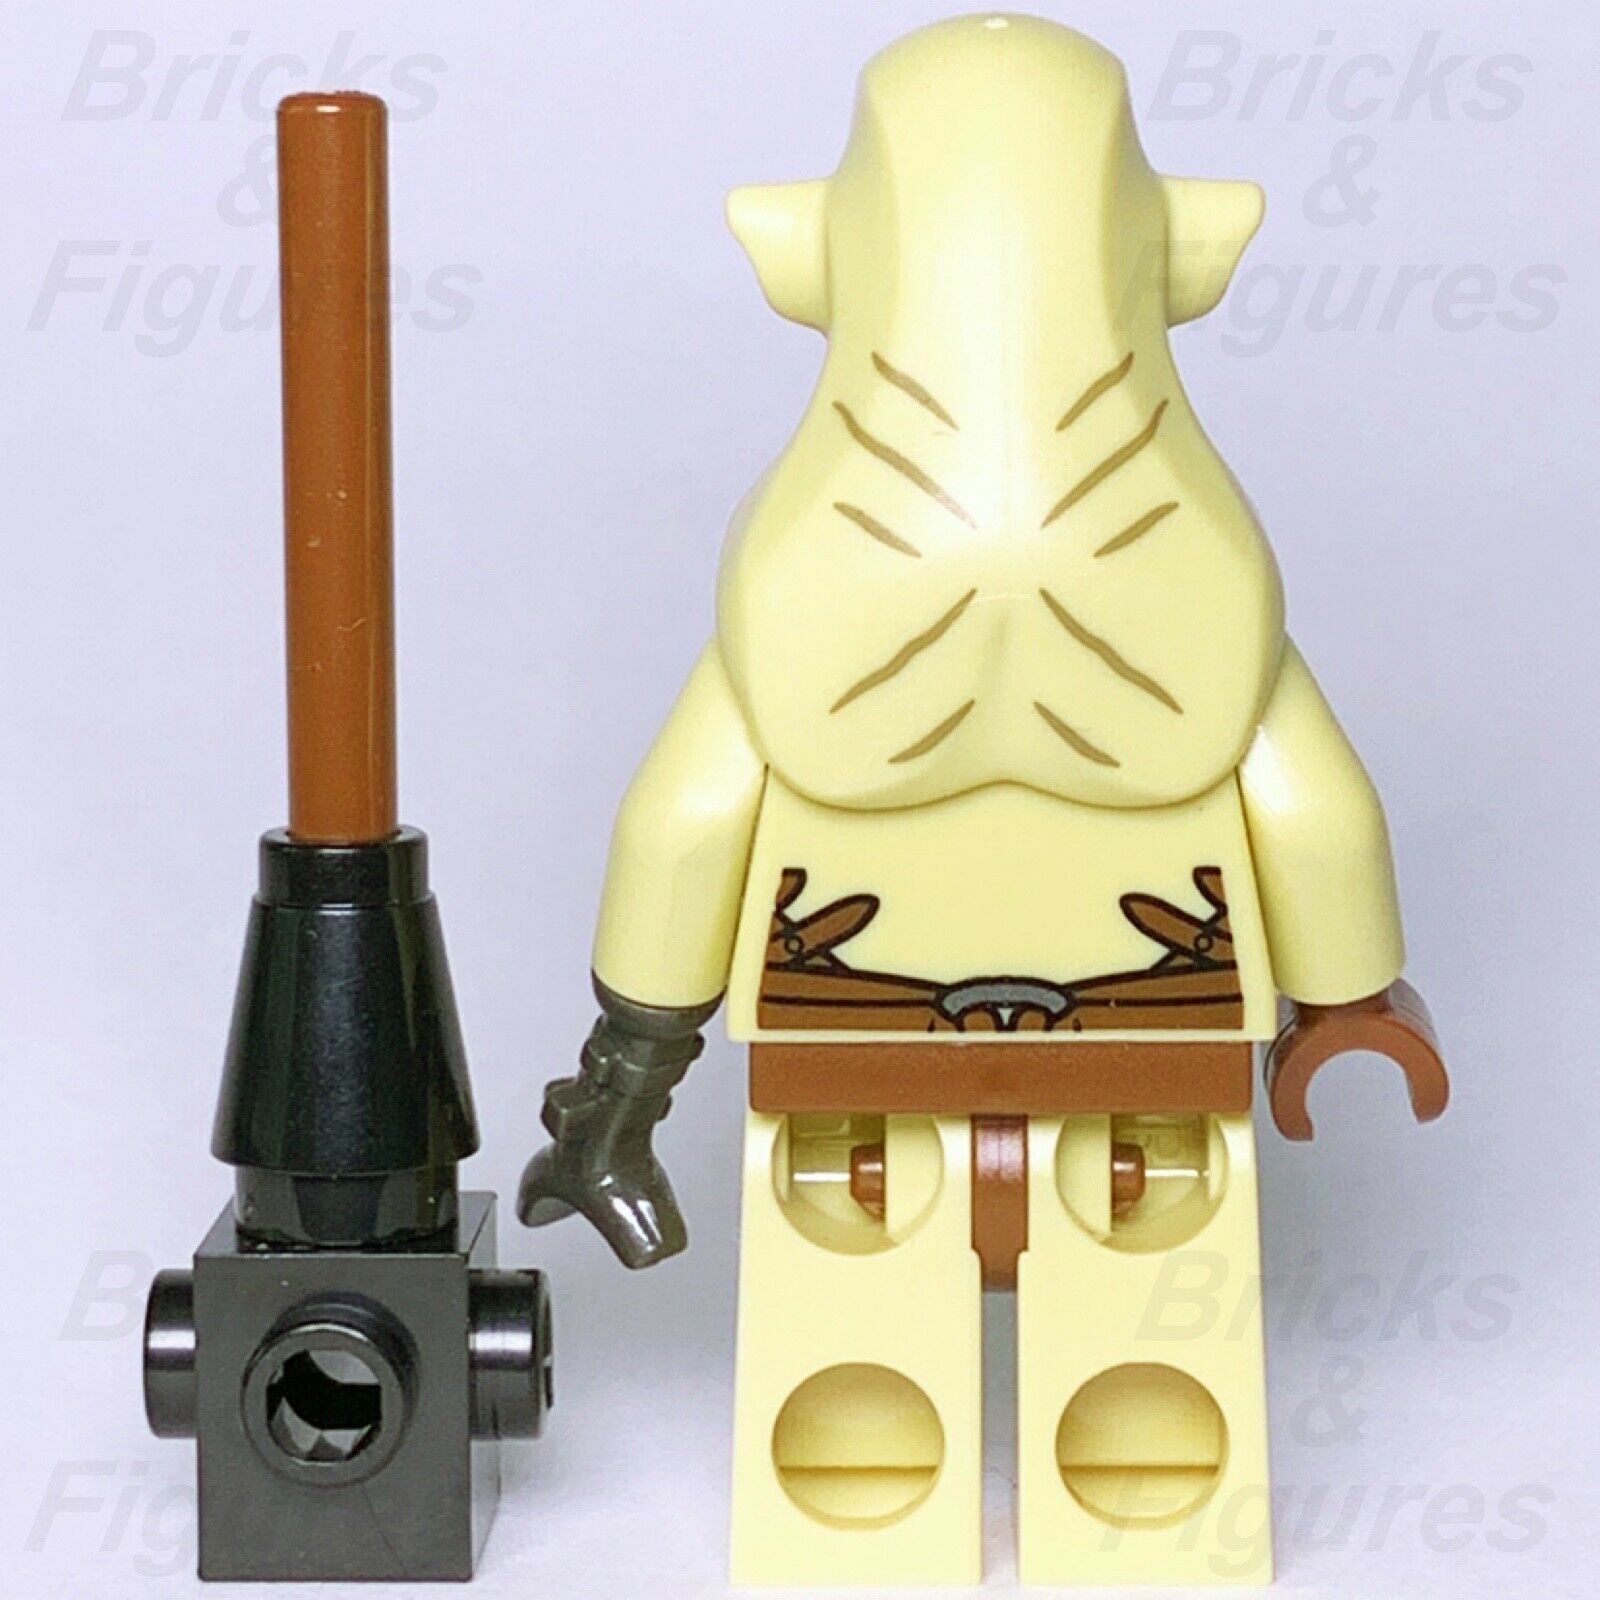 New The Hobbit Lord of the Rings LEGO Azog Orc King Defiler Minifigure 79017 - Bricks & Figures